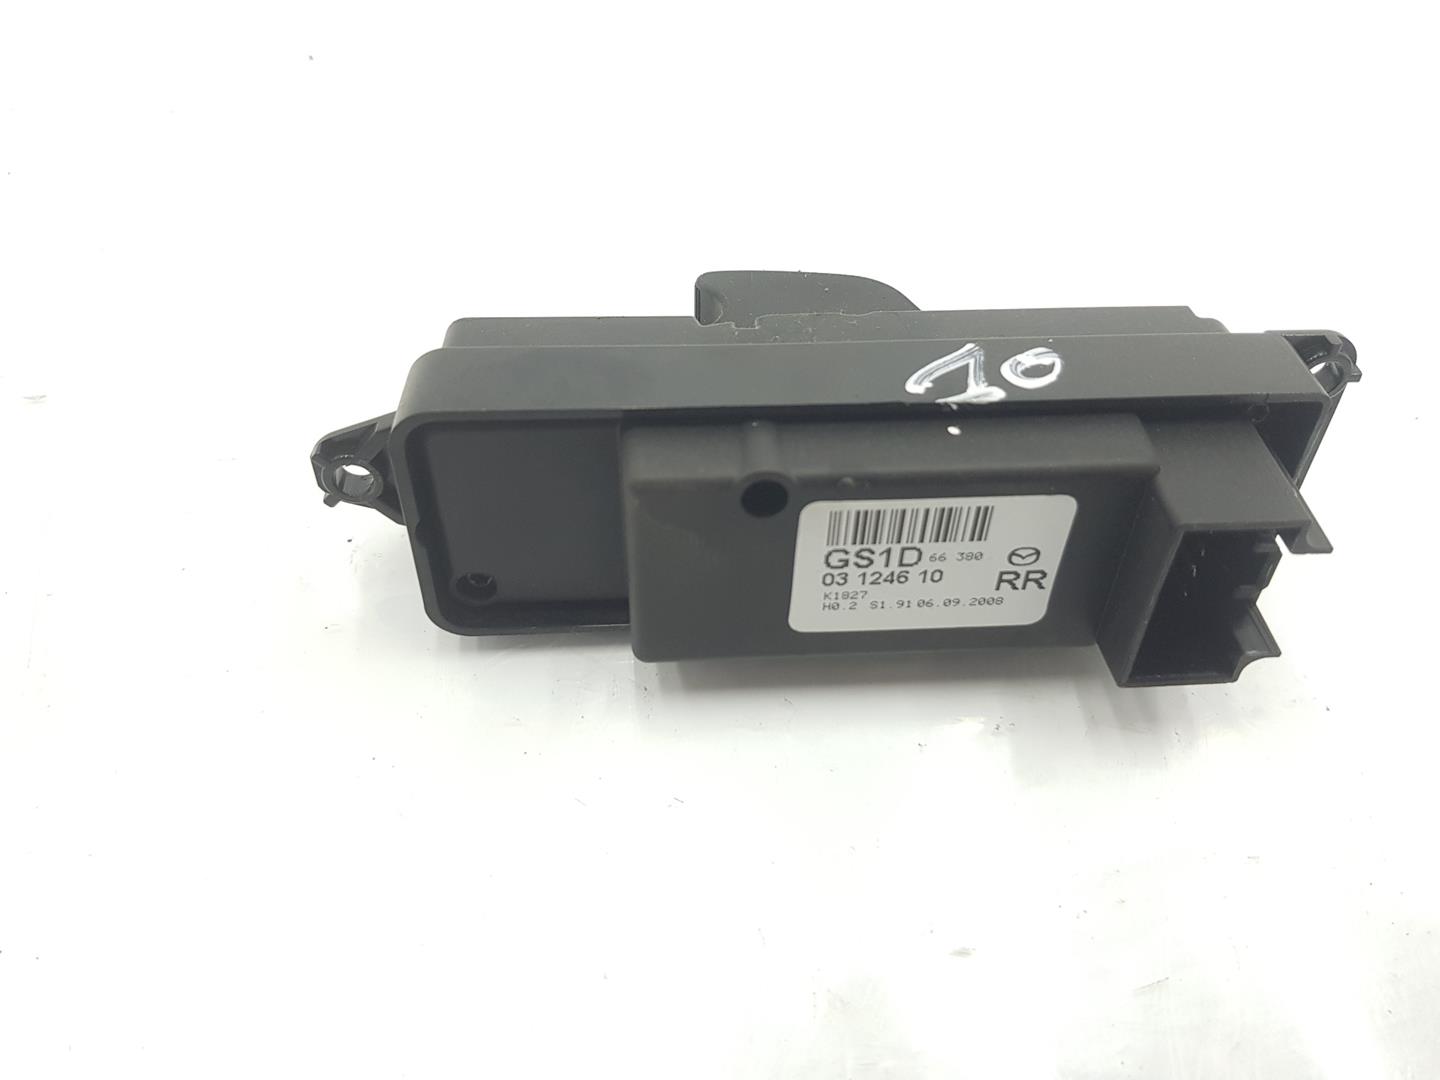 MAZDA 6 GH (2007-2013) Rear Right Door Window Control Switch GS1D66380, GS1D66380 19908800